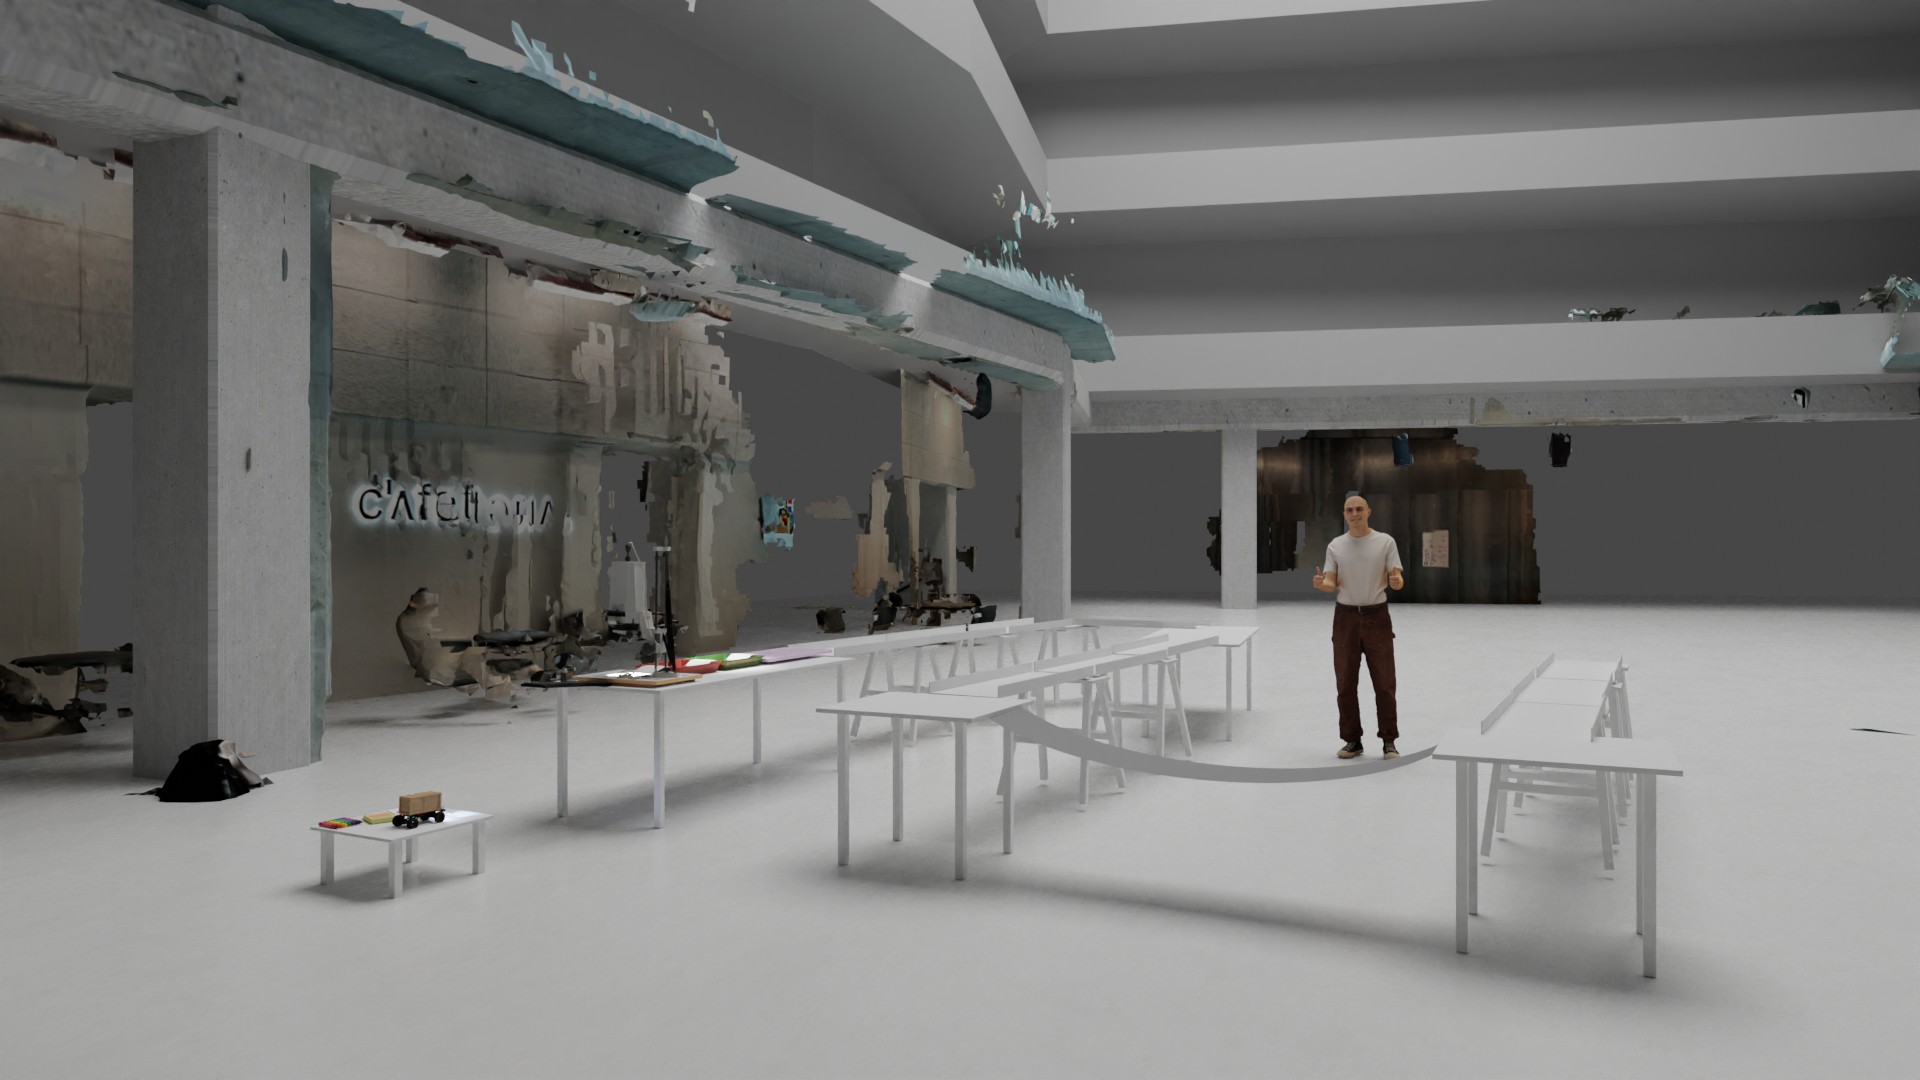 Rendered Preview of what the exhibition could look like